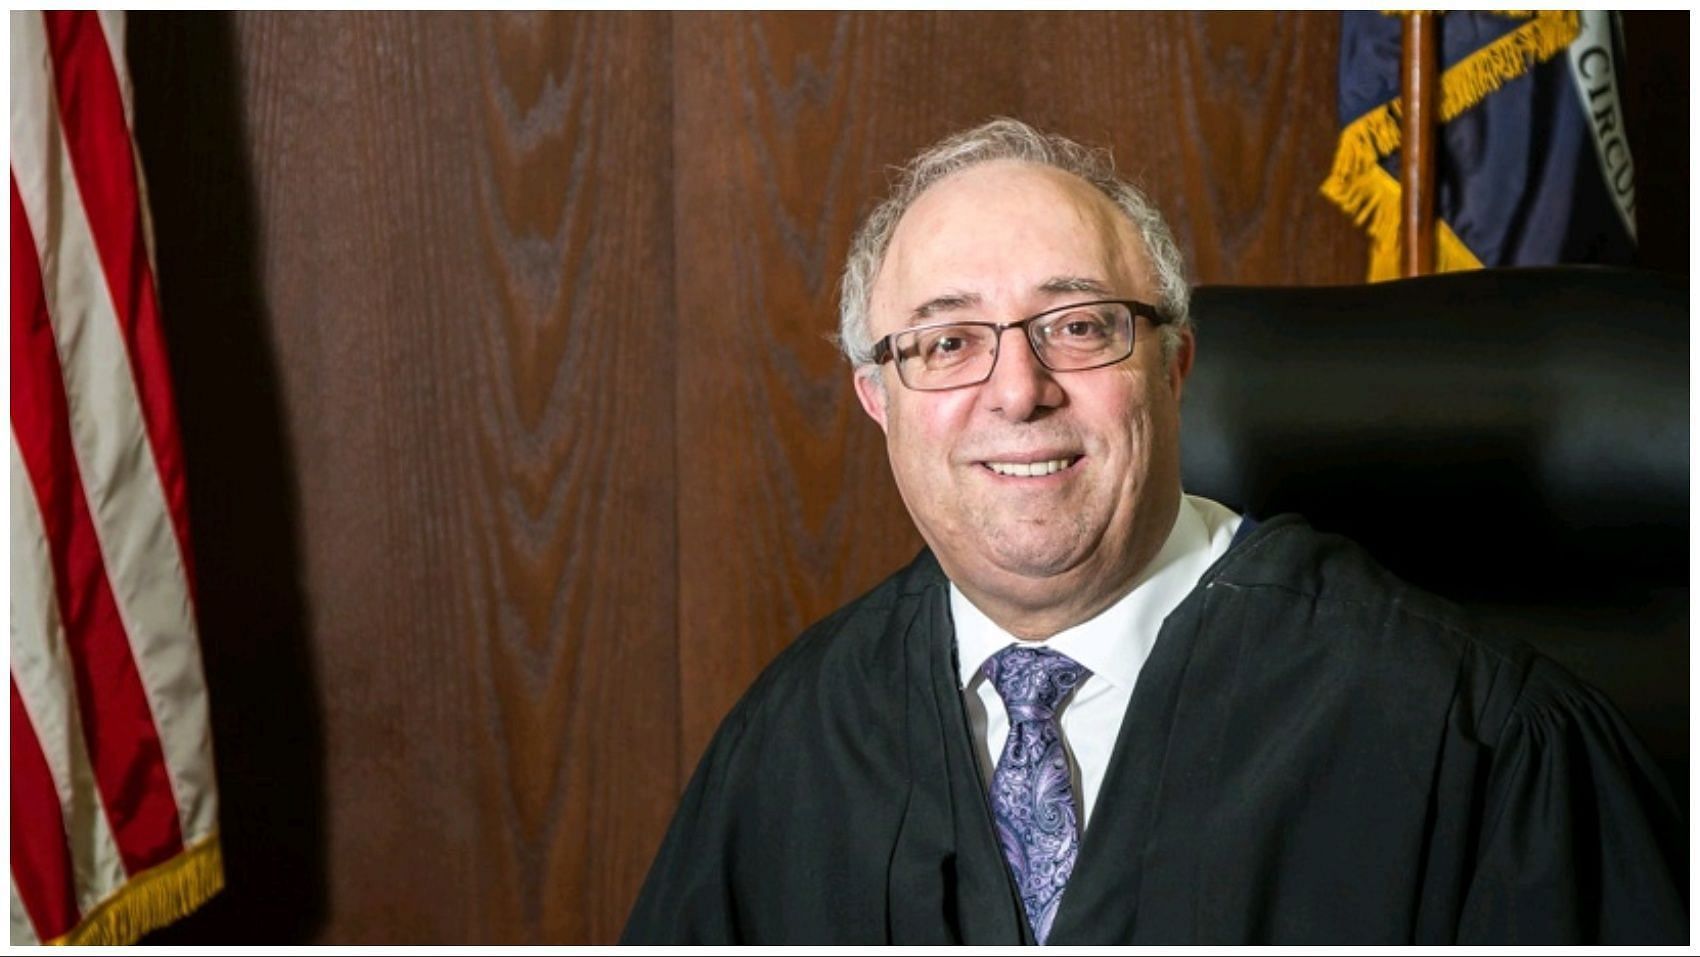 Joseph J Farah was appointed Genesee County Circuit Court judge in March 1998 (Image via Genesee County Circuit Court)